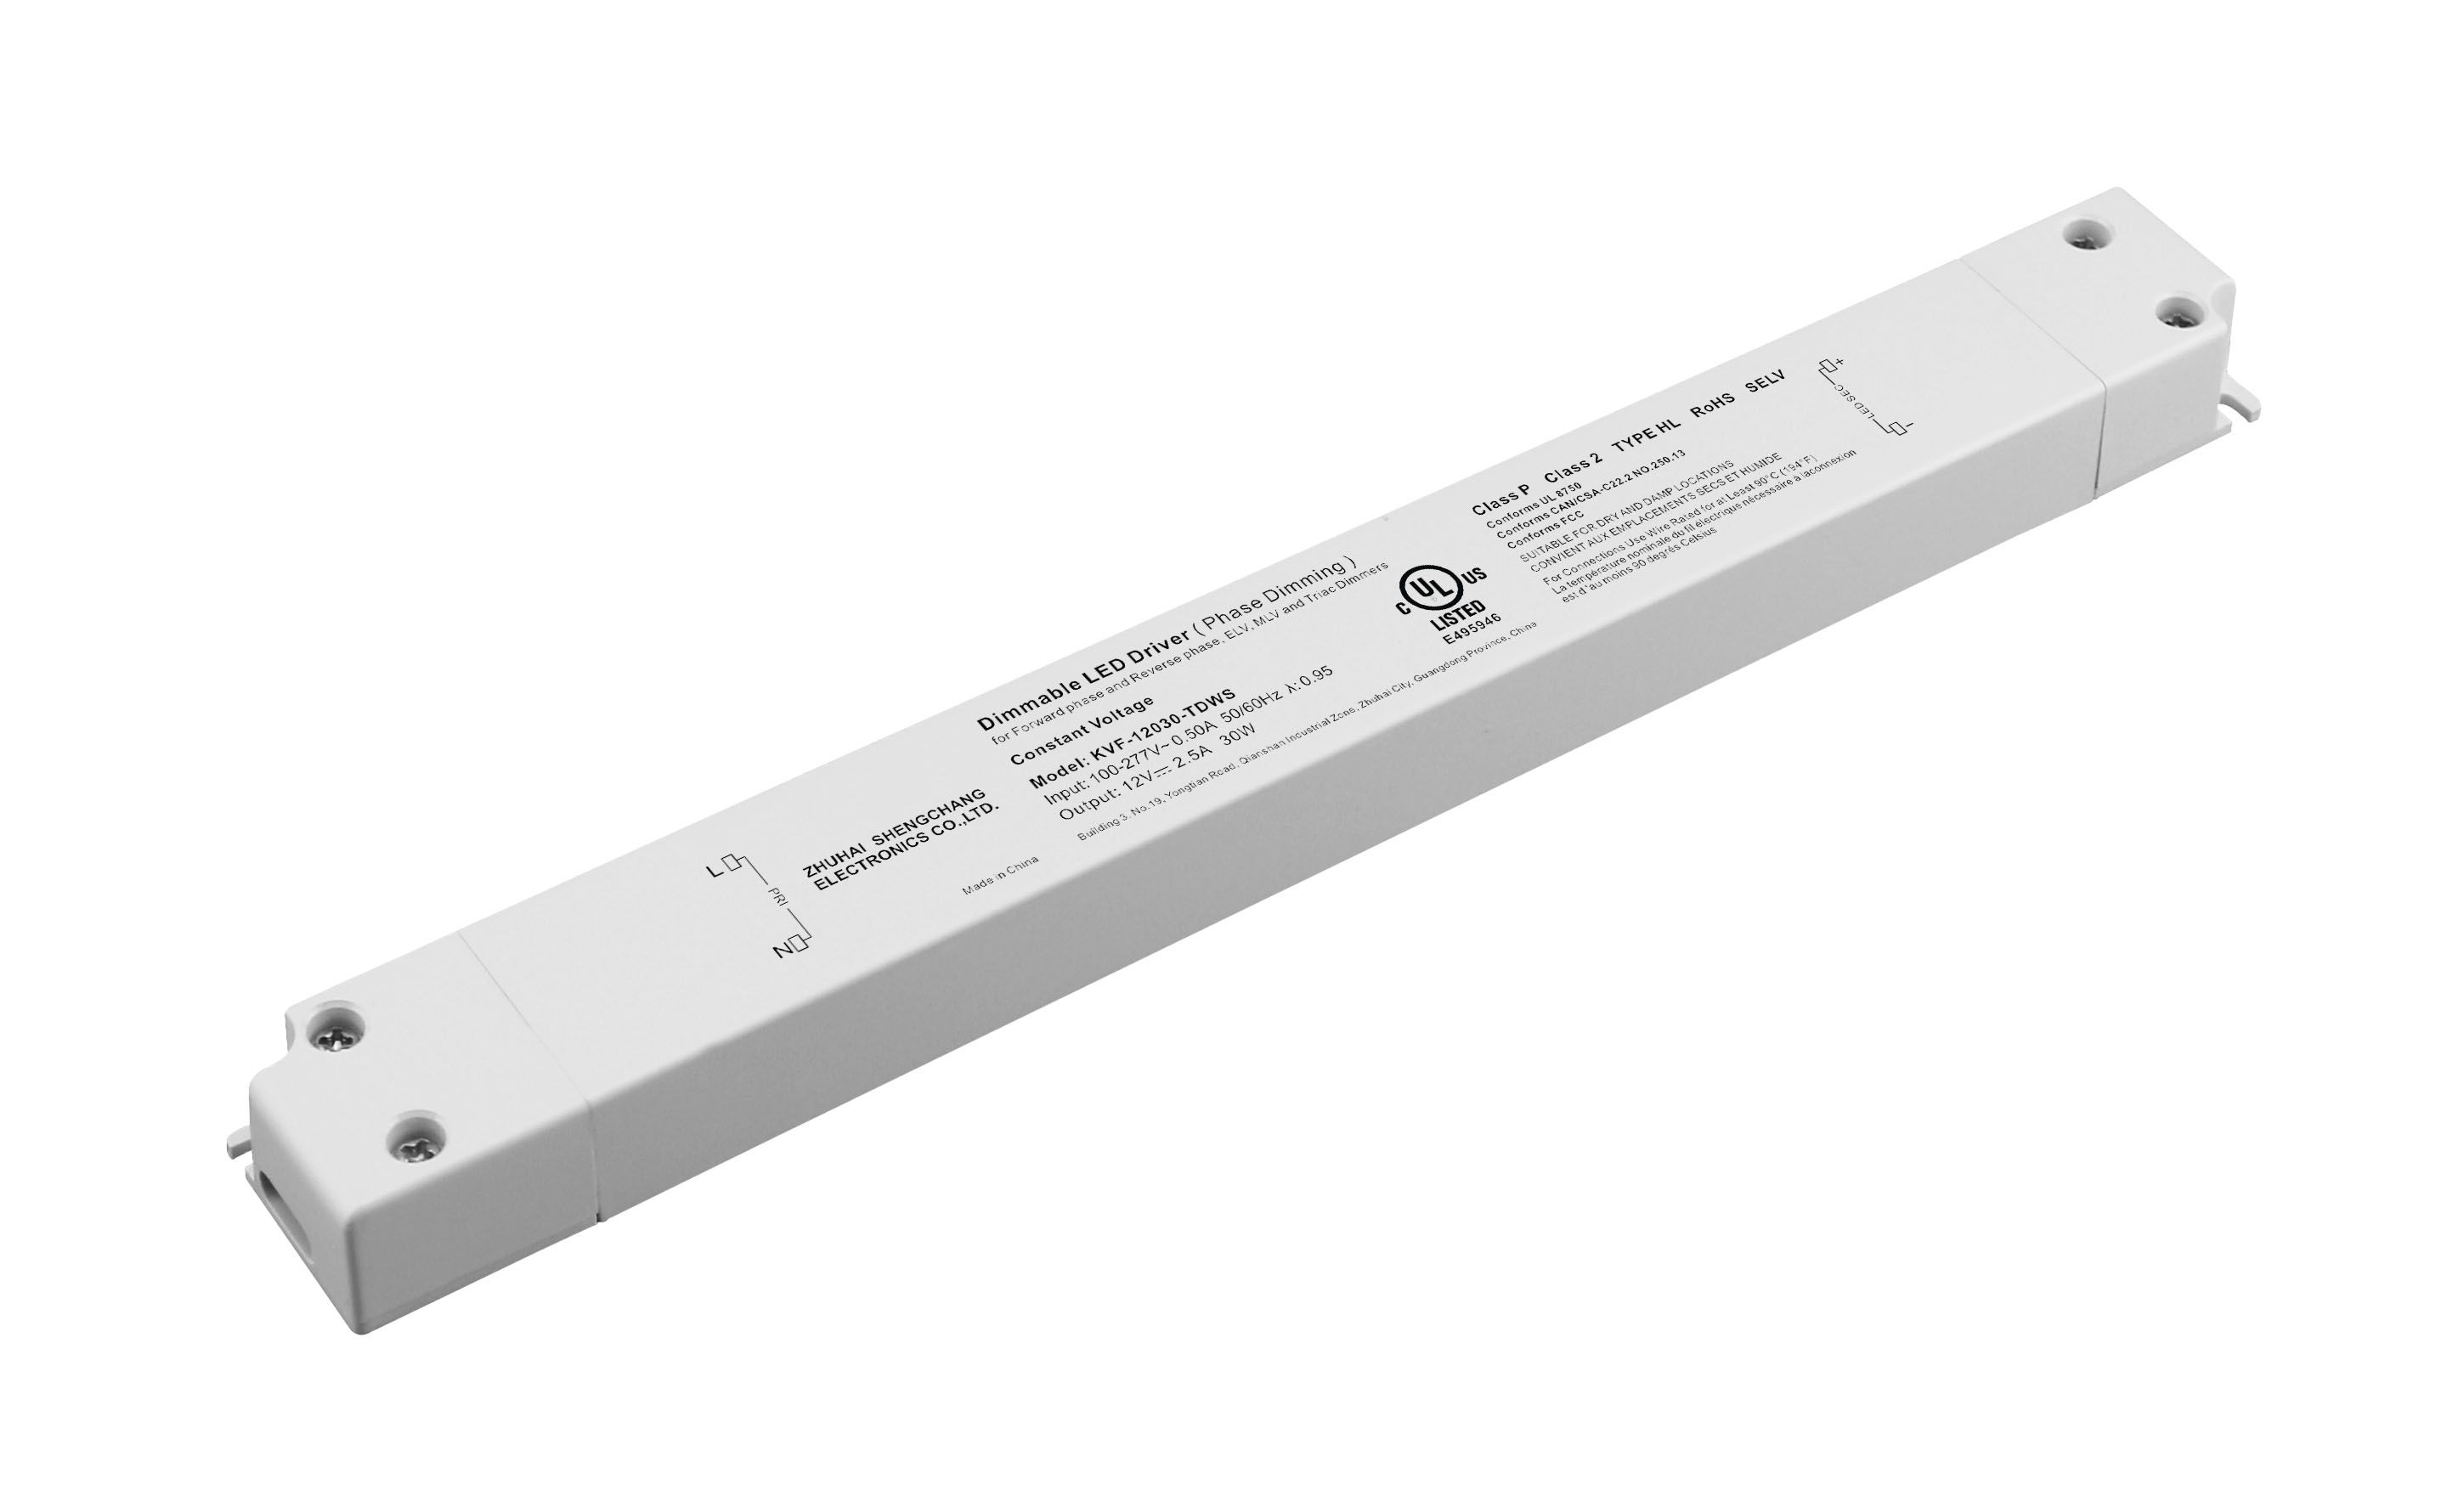 30W Constant Voltage Triac&0/1-10V Dimmable LED driver